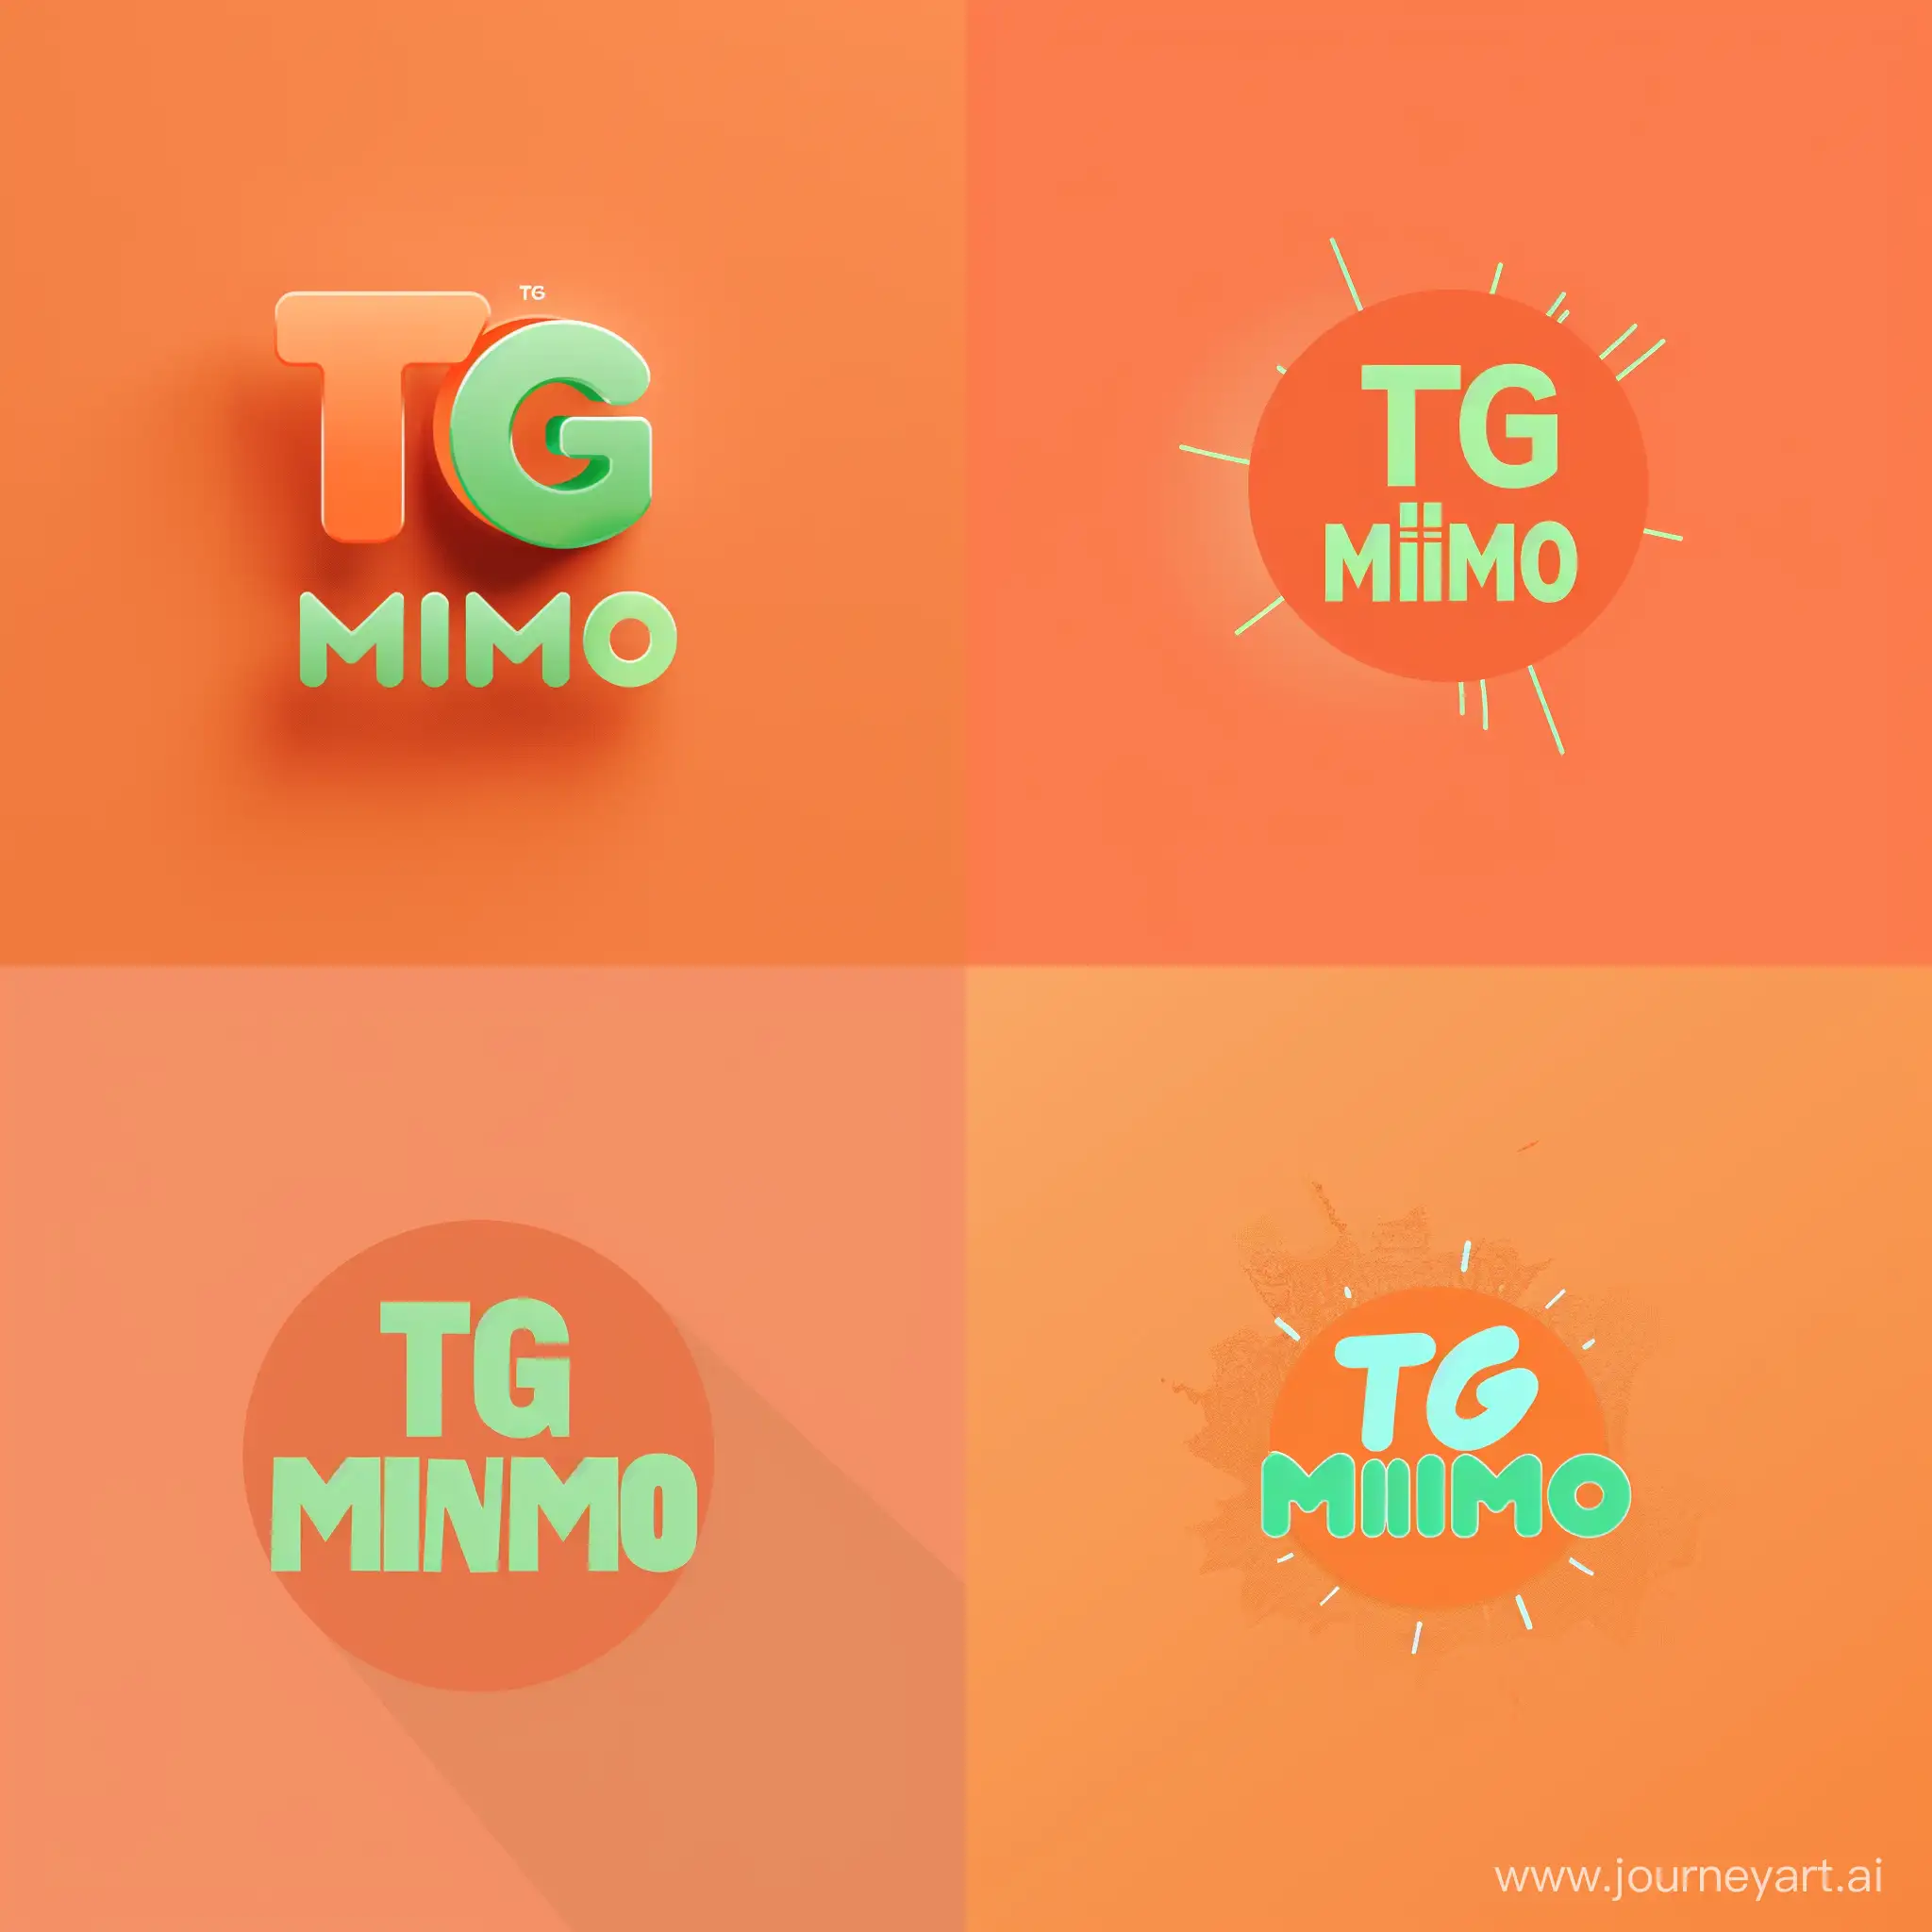 Vibrant-All-News-Logo-with-TG-Minimo-in-Light-Green